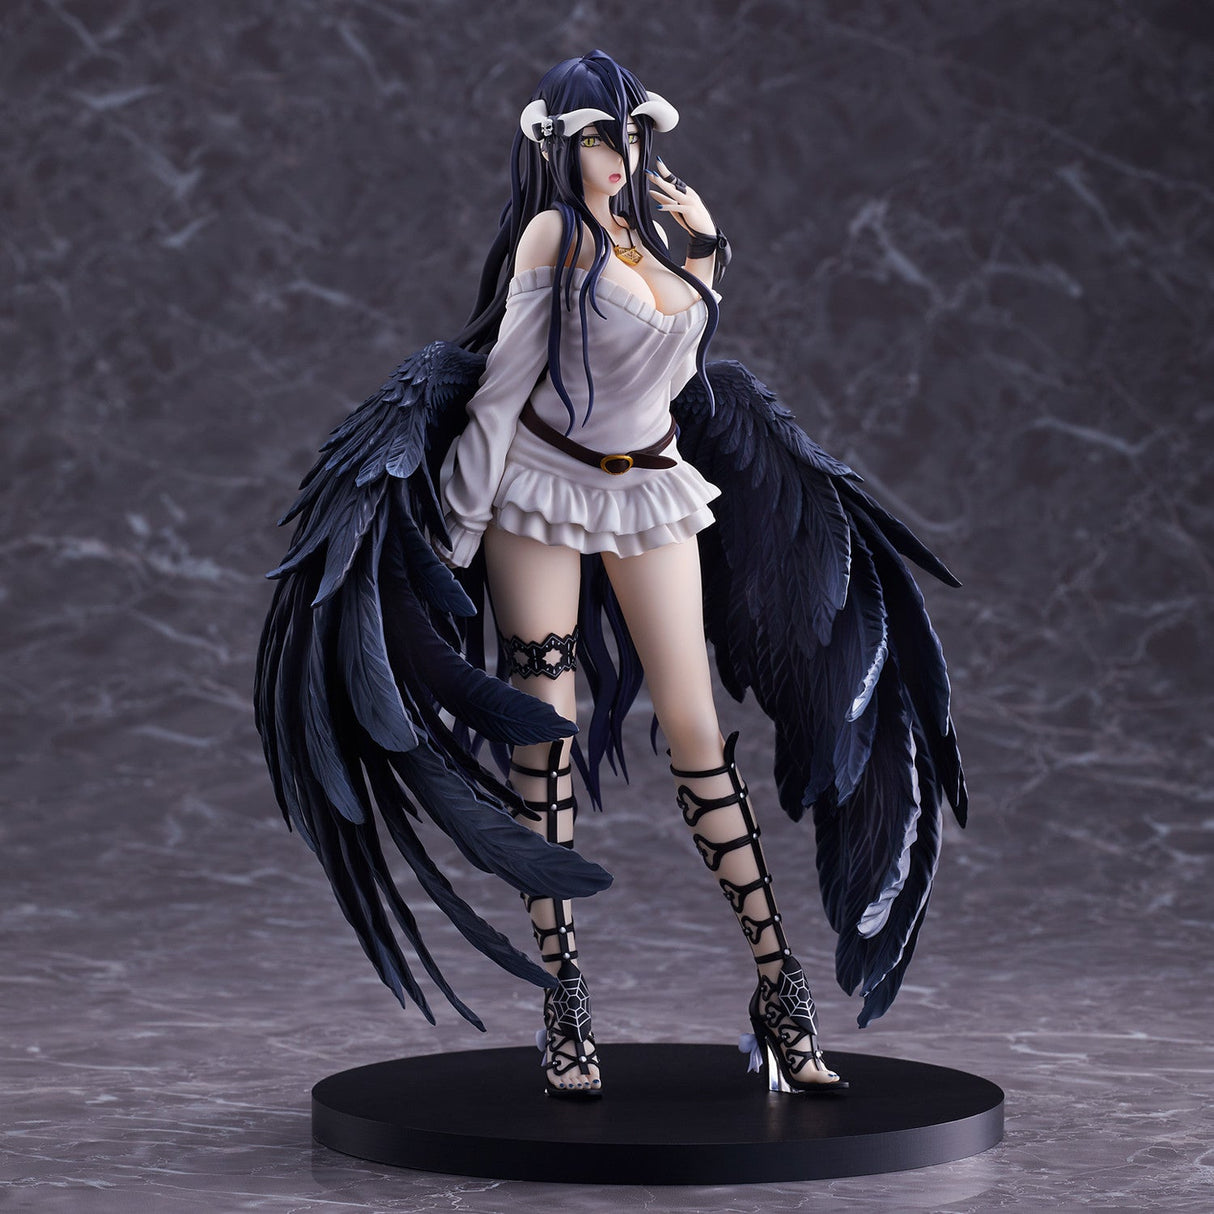 Overlord III - Albedo - so-bin ver., Franchise: Overlord III, Brand: Union Creative International Ltd., Release Date: 30. Sep 2020, Dimensions: 270 mm, Material: ABS, PVC, Nippon Figures